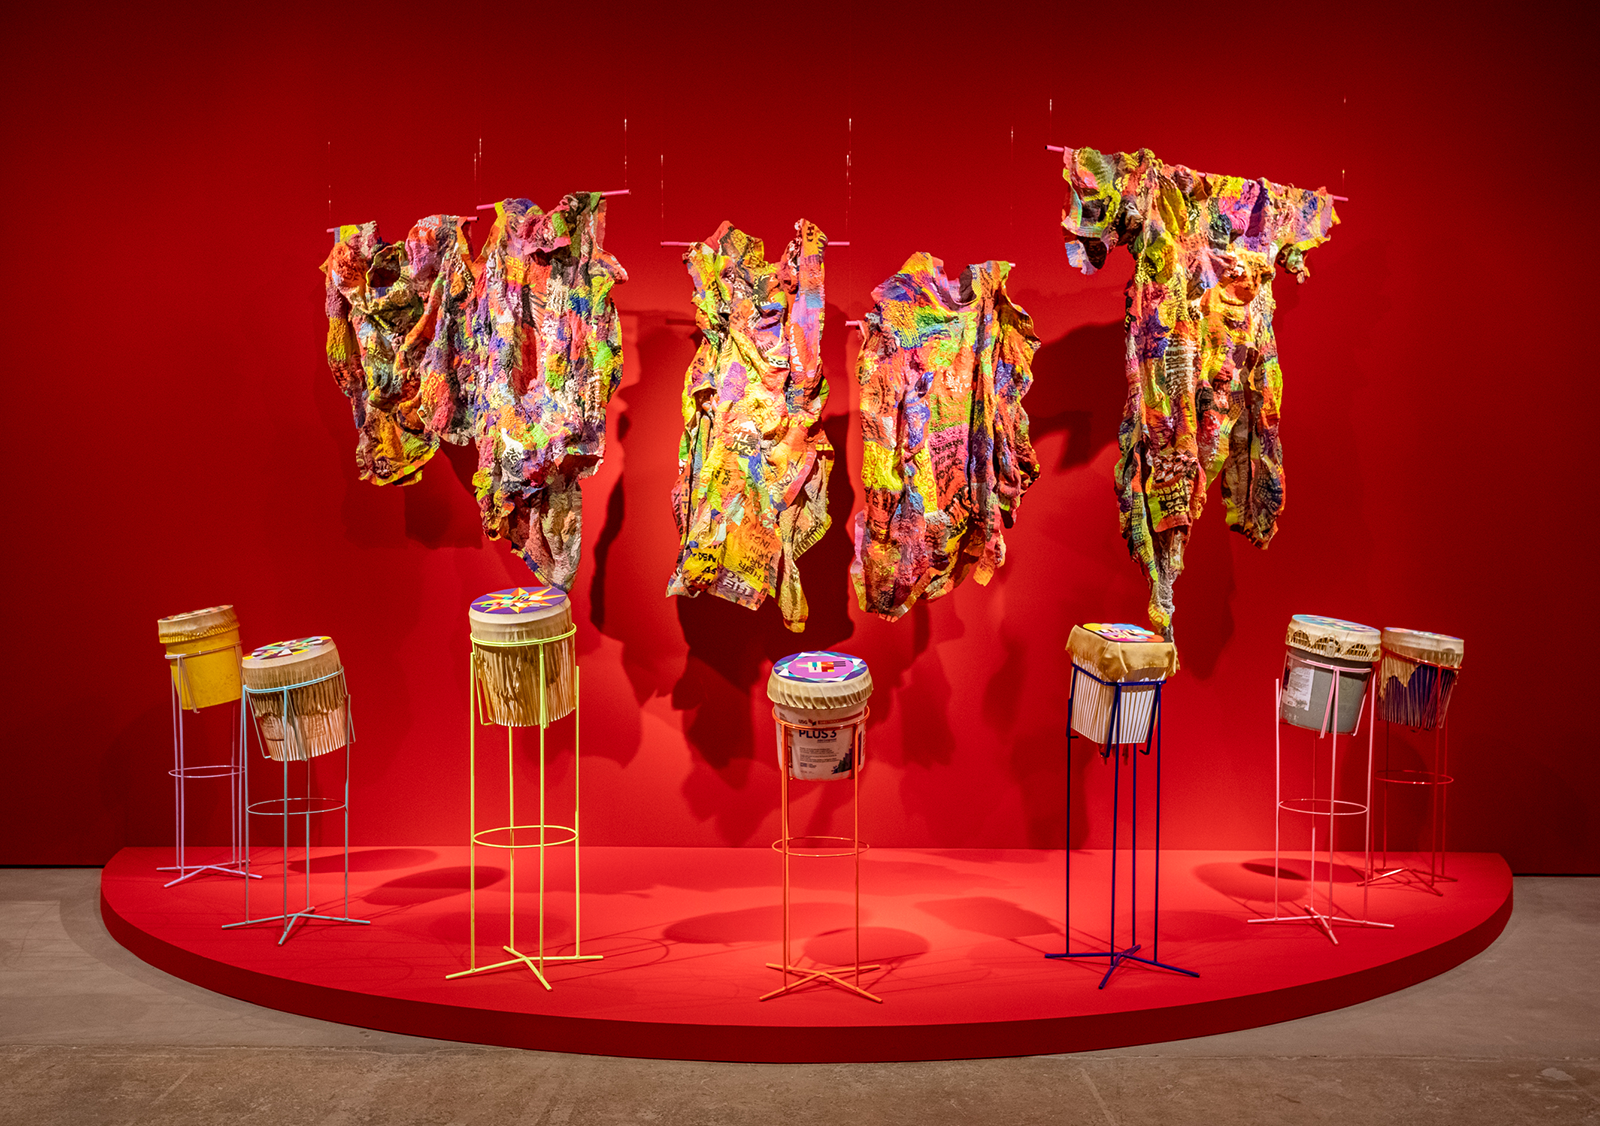 Bright red wall with seven drum-like structures and five multicolored pieces of clothing hanging above them